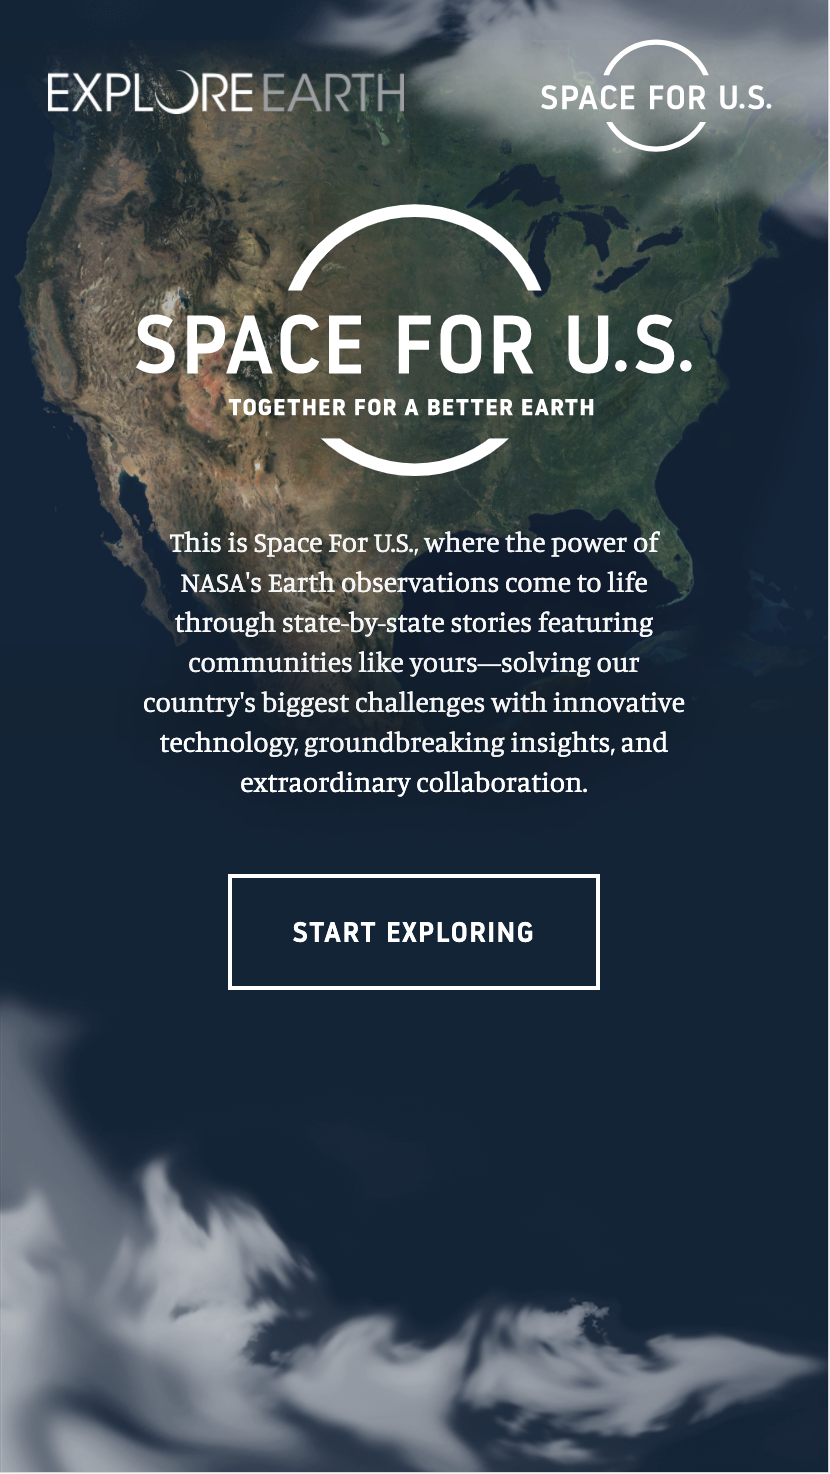 Space For U.S.